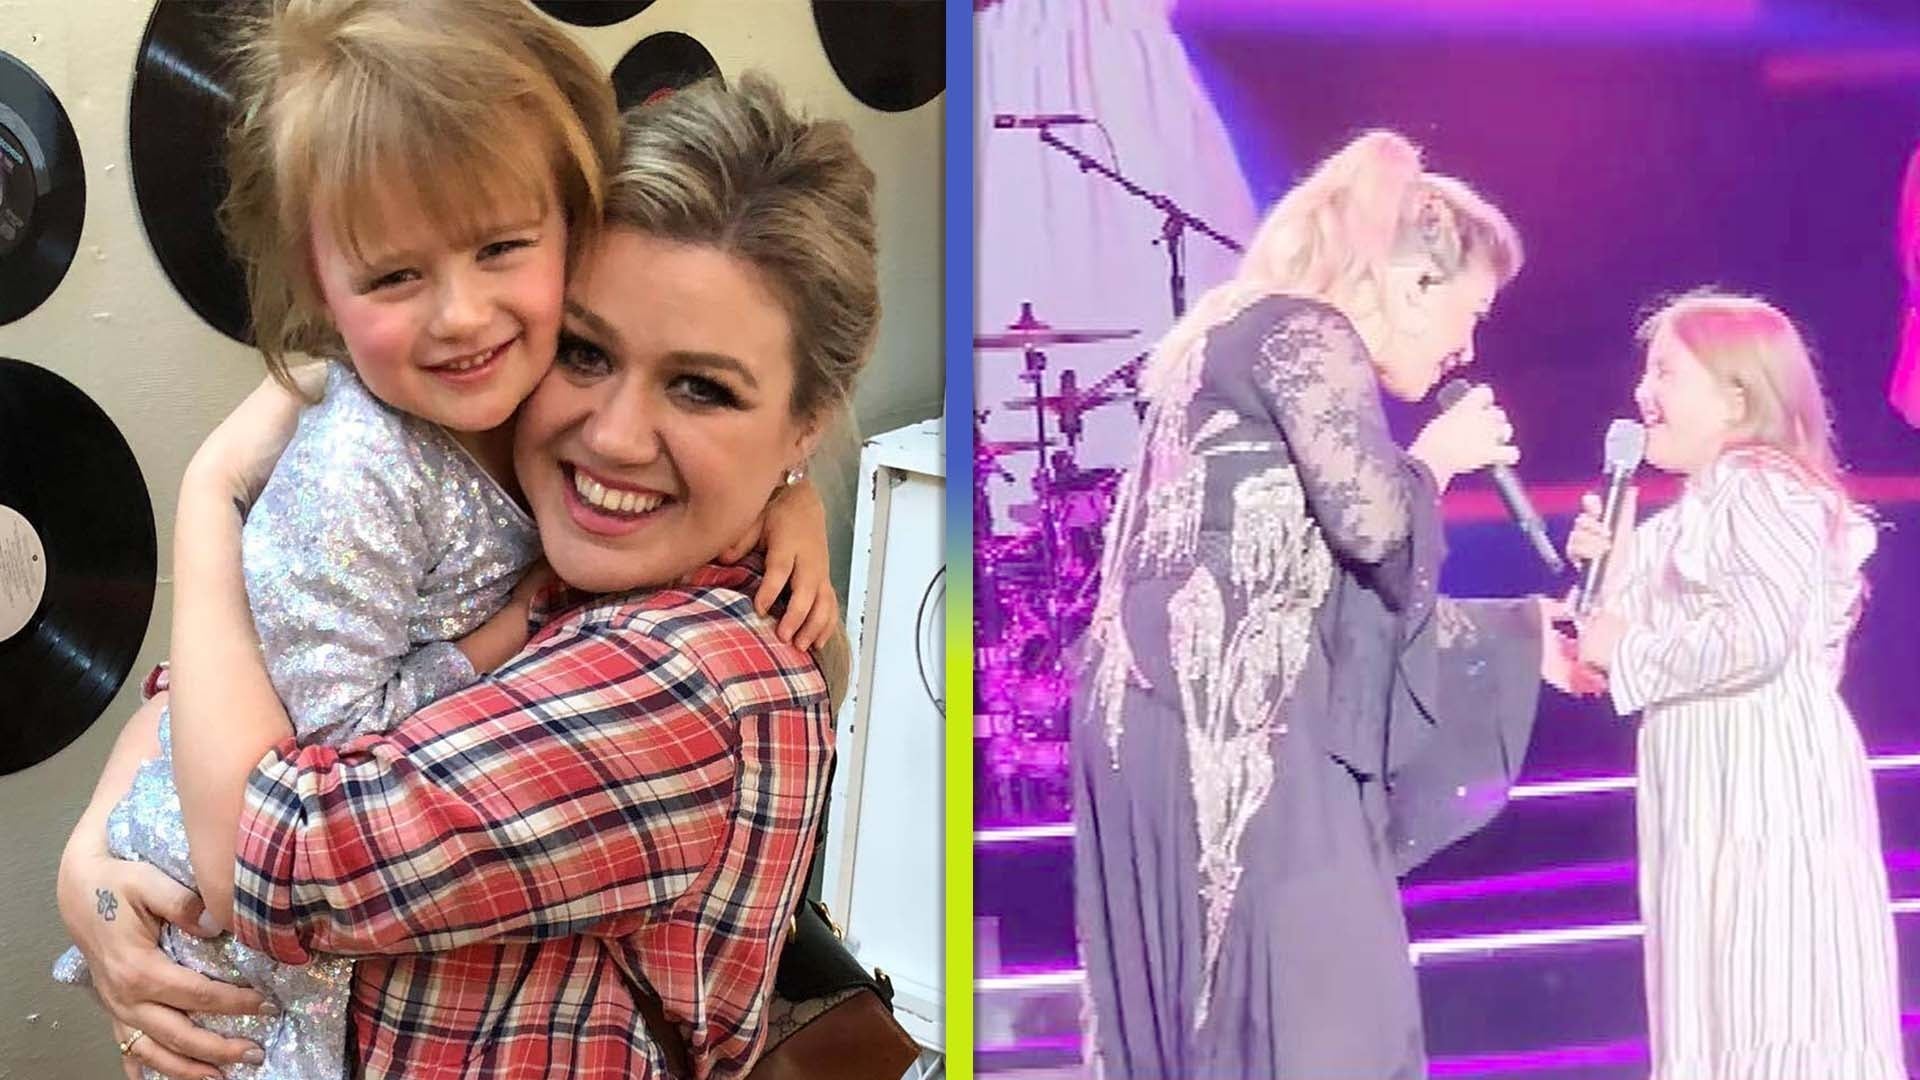 Kelly Clarkson Duets With Daughter River Rose on New Song